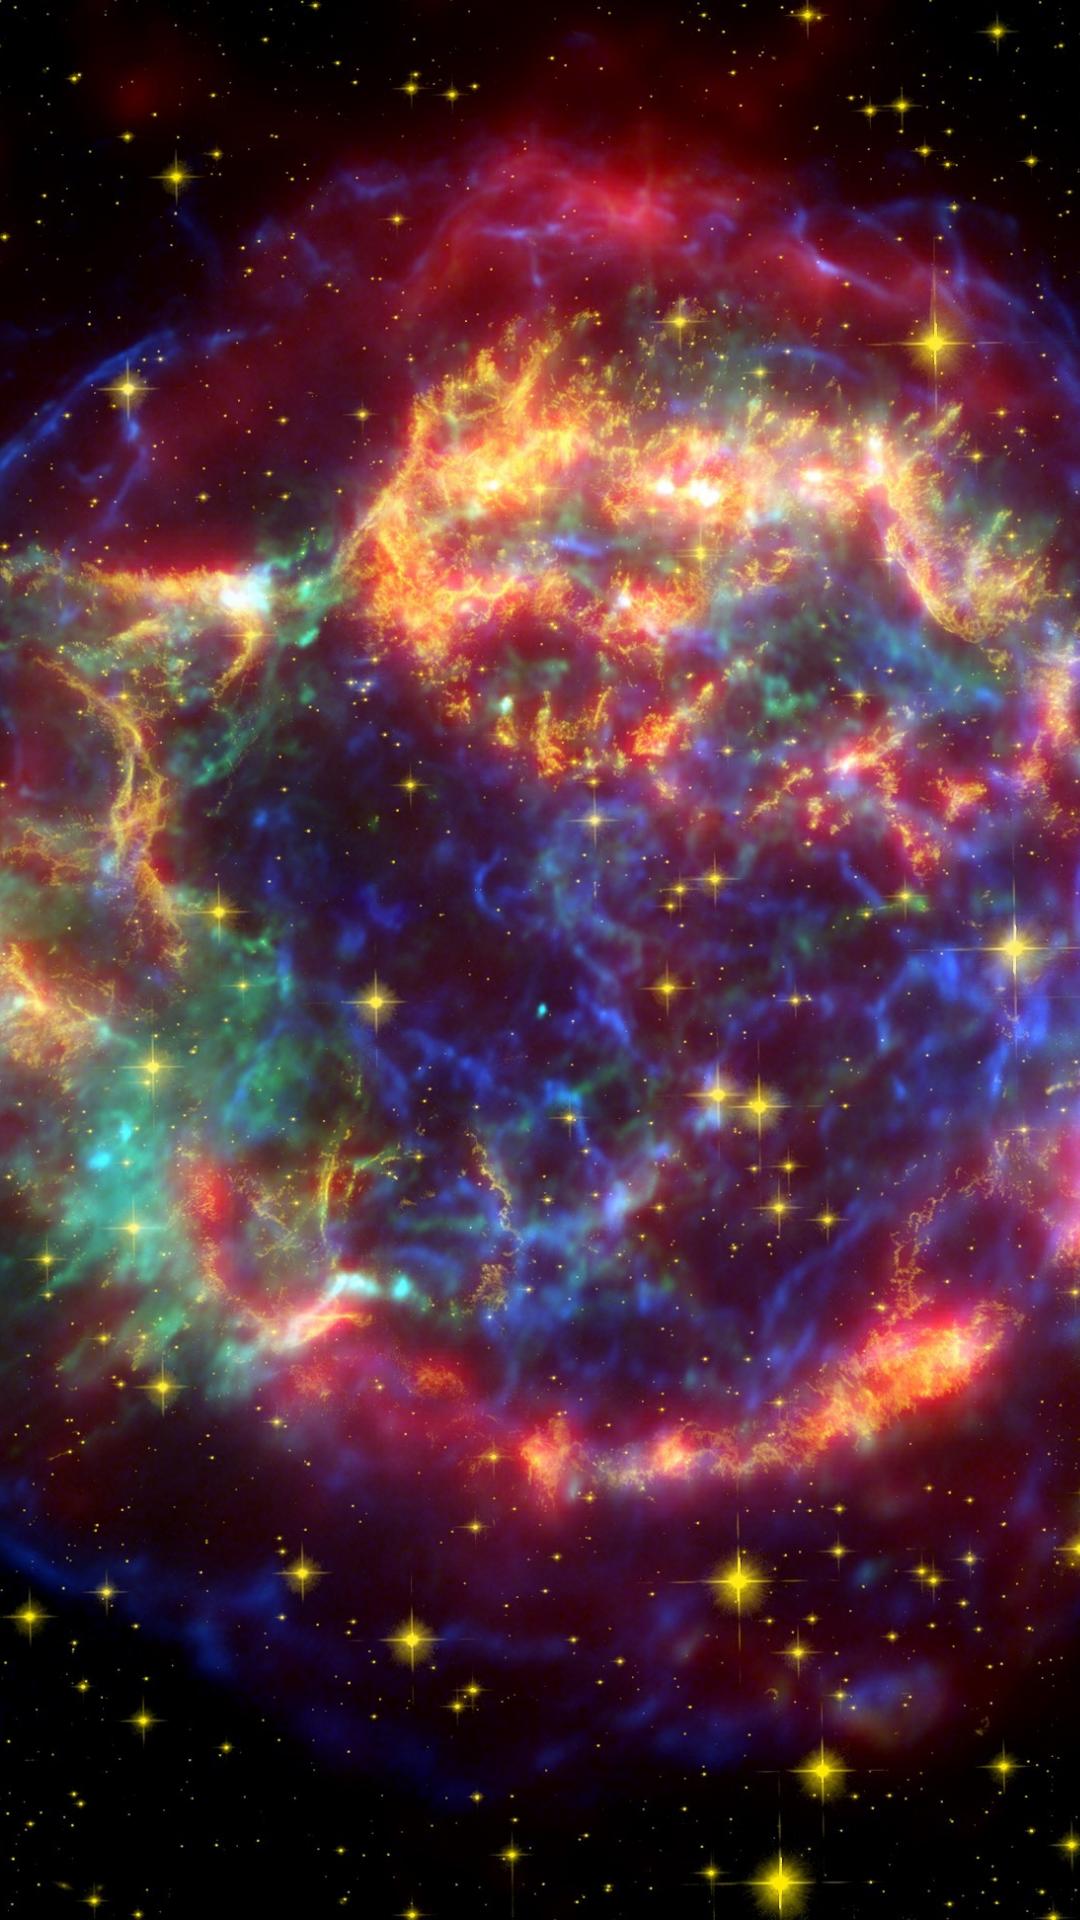 supernova wallpaper,nature,galaxy,nebula,outer space,astronomical object